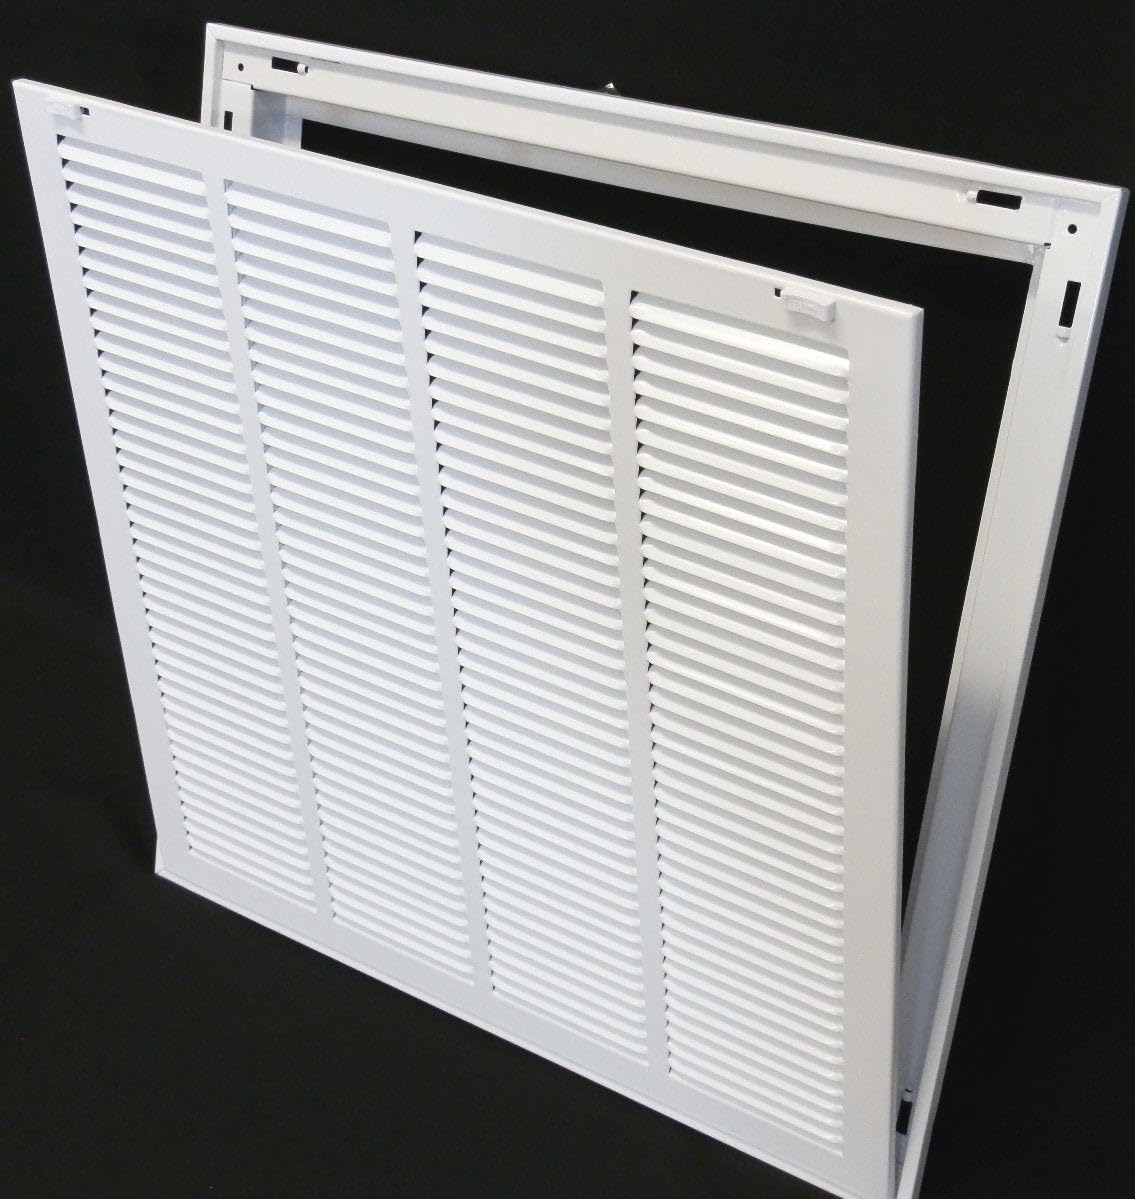 14&quot; X 24&quot; Steel Return Air Filter Grille for 1&quot; Filter - Removable Frame - [Outer Dimensions: 16 5/8&quot; X 26 5/8&quot;]